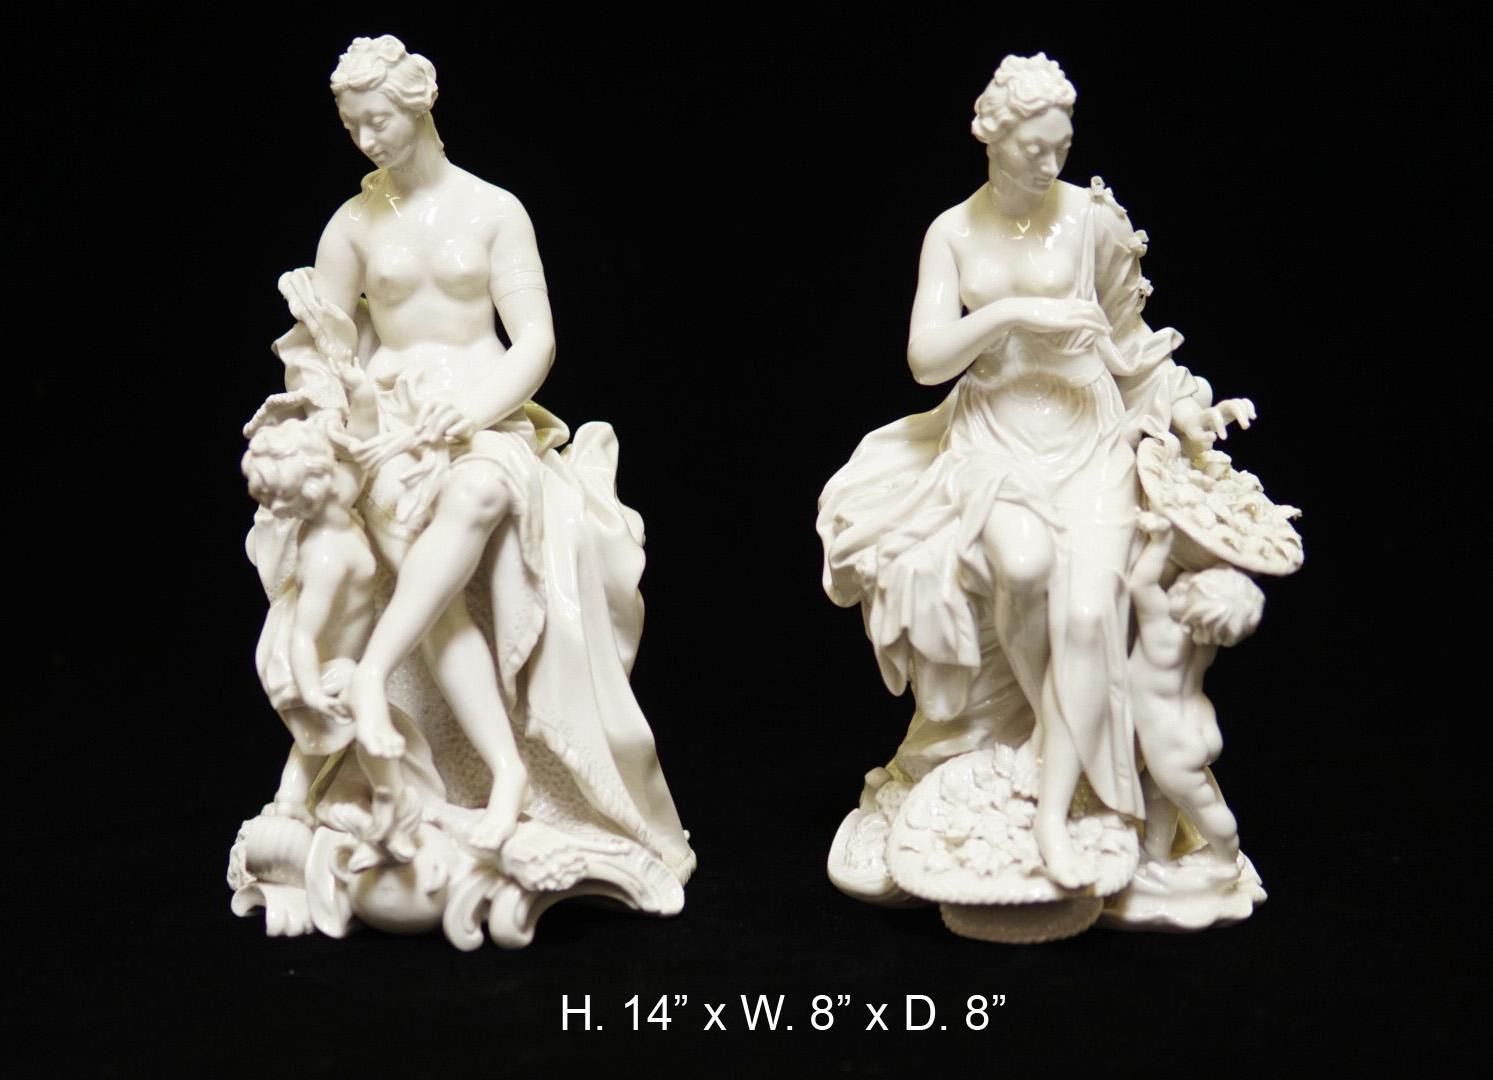 Charming pair of German glazed white porcelain figure groups
Each depicting seated maiden dressed in classical robes with putti. meticulous attention has been given to every details 
Measures: H. 14